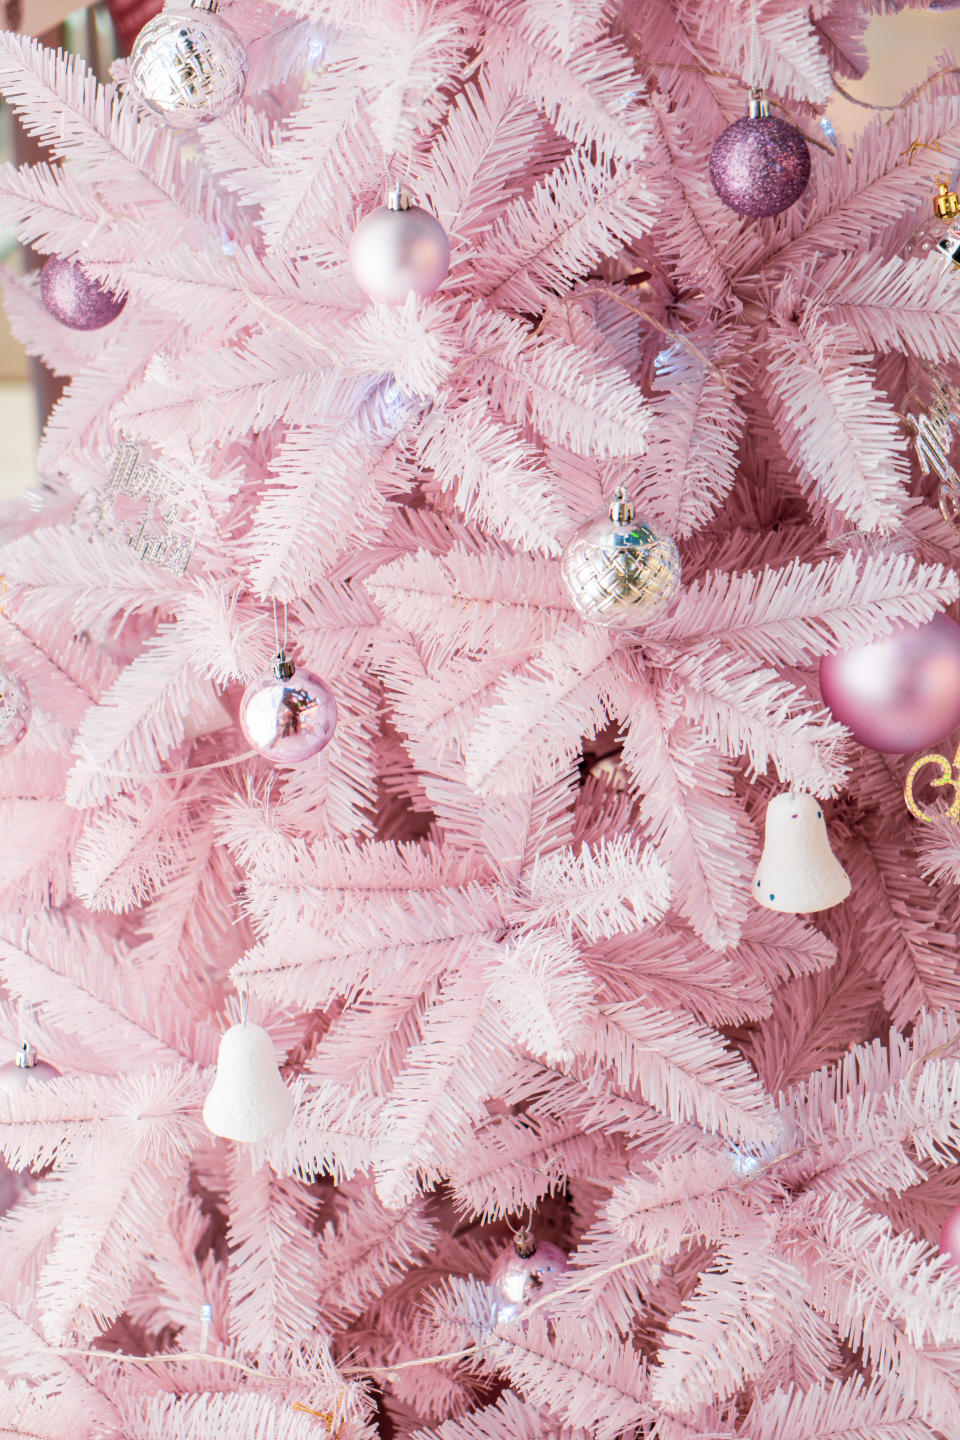 Pink Christmas trees, pink baubles and pink garlands can be a great way to embrace this trend. (Getty Images)